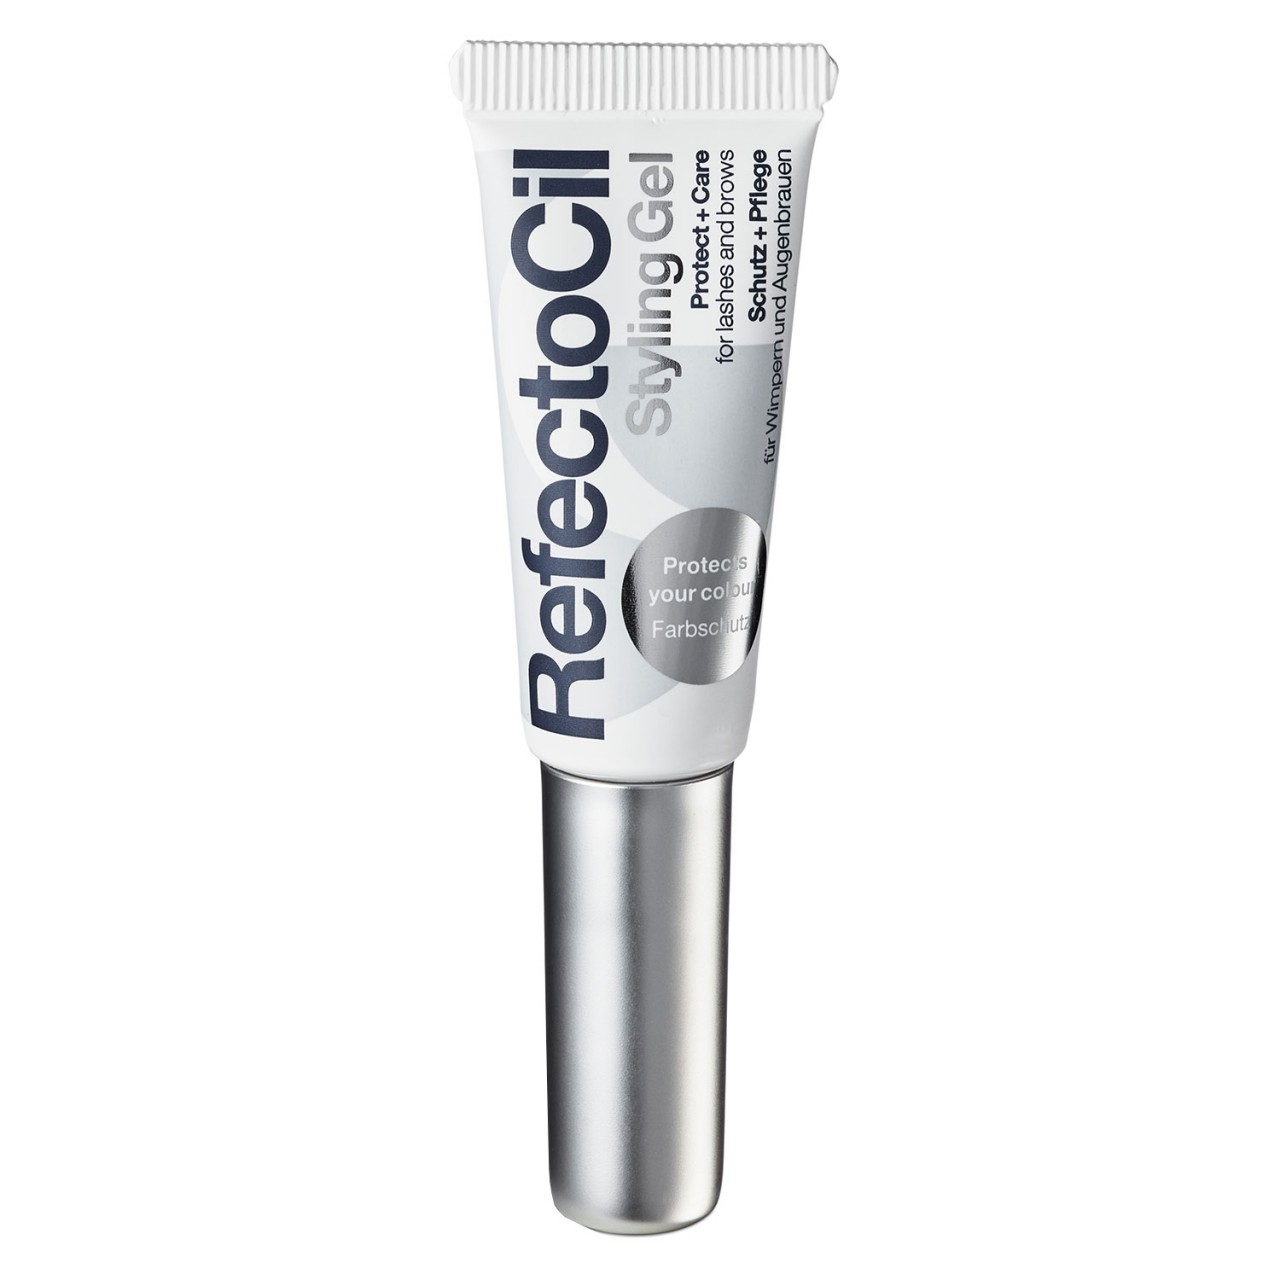 RefectoCil - Styling Gel Protect & Care for Lashes and Brows von RefectoCil